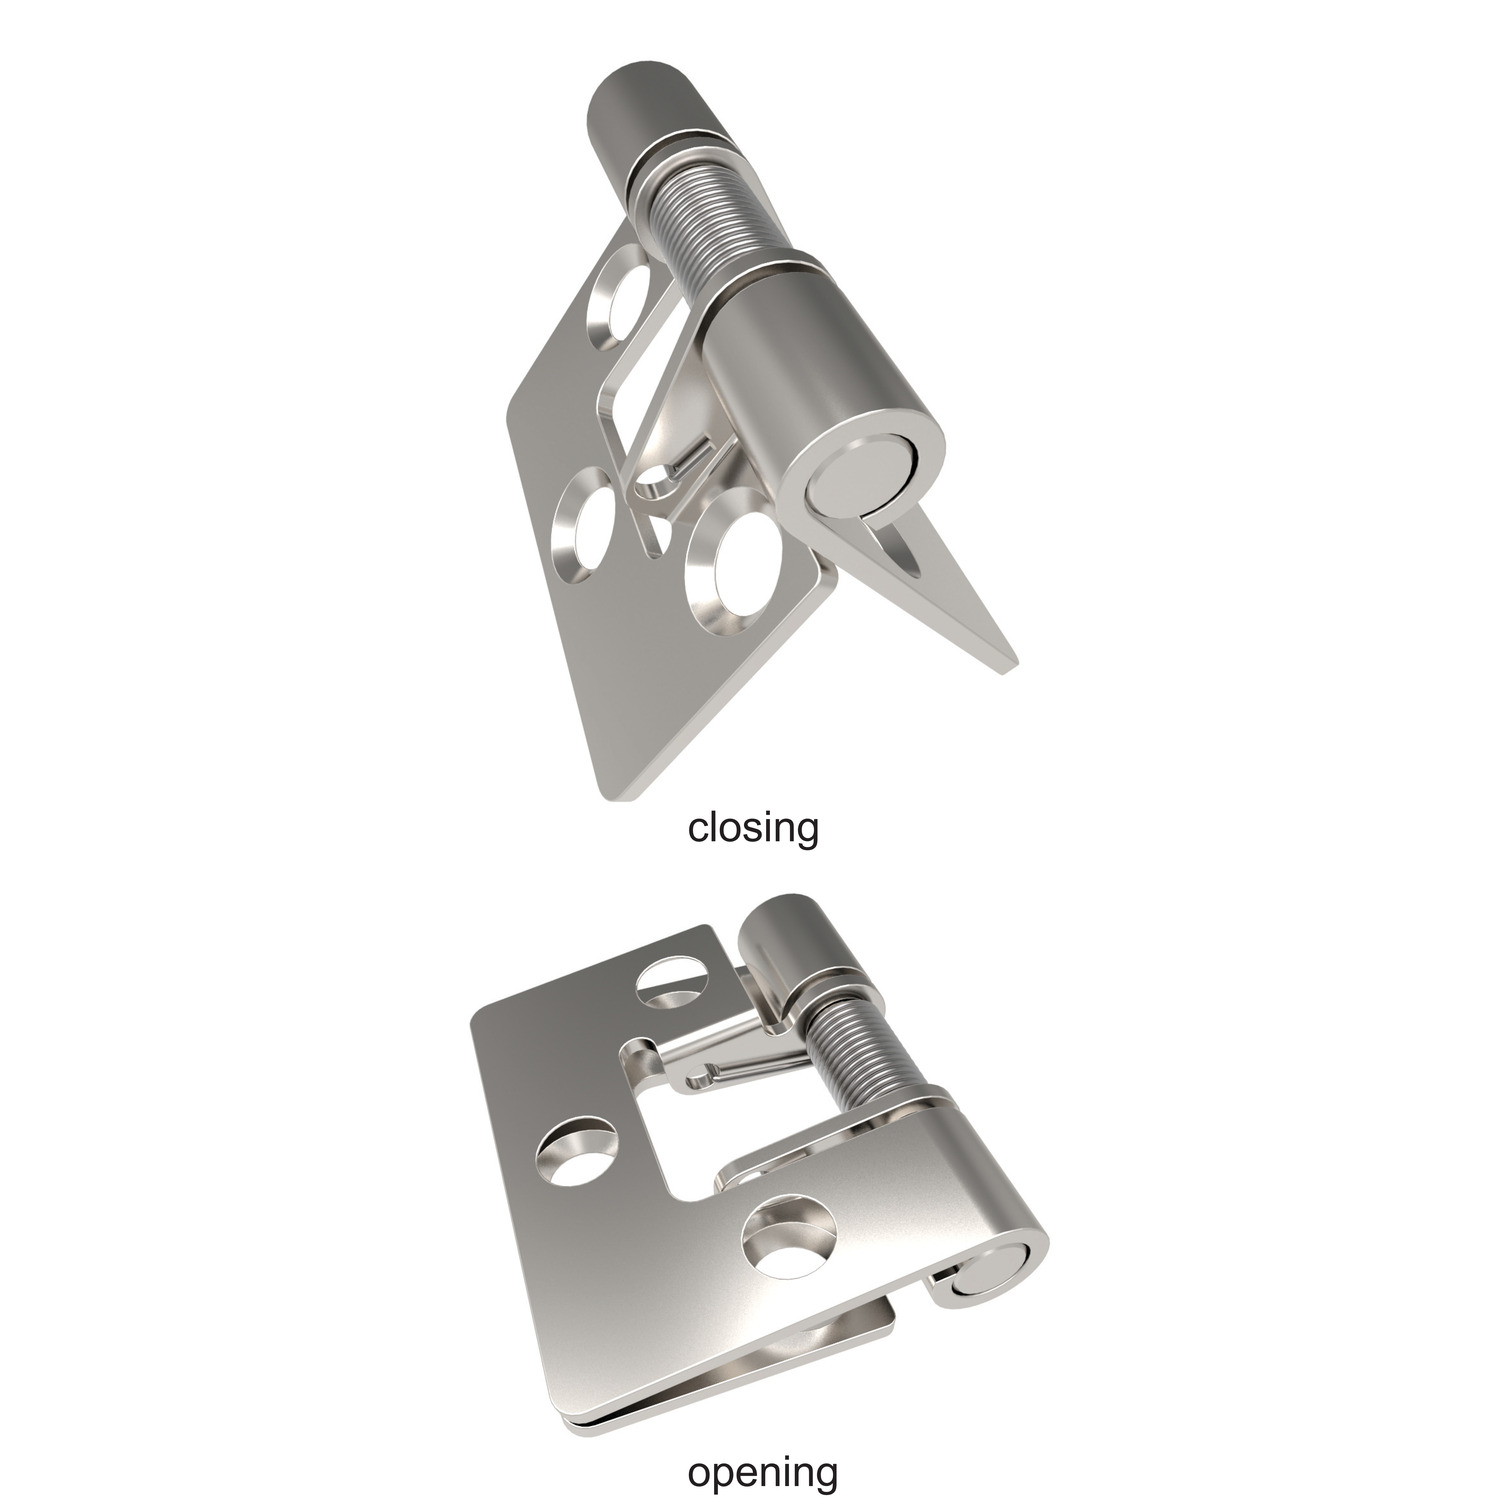 Spring Hinges - High Tension Stainless steel (AISI 304) high tension spring hinges for screw mounting. Available with opening or closing type spring tensions depending on your application.